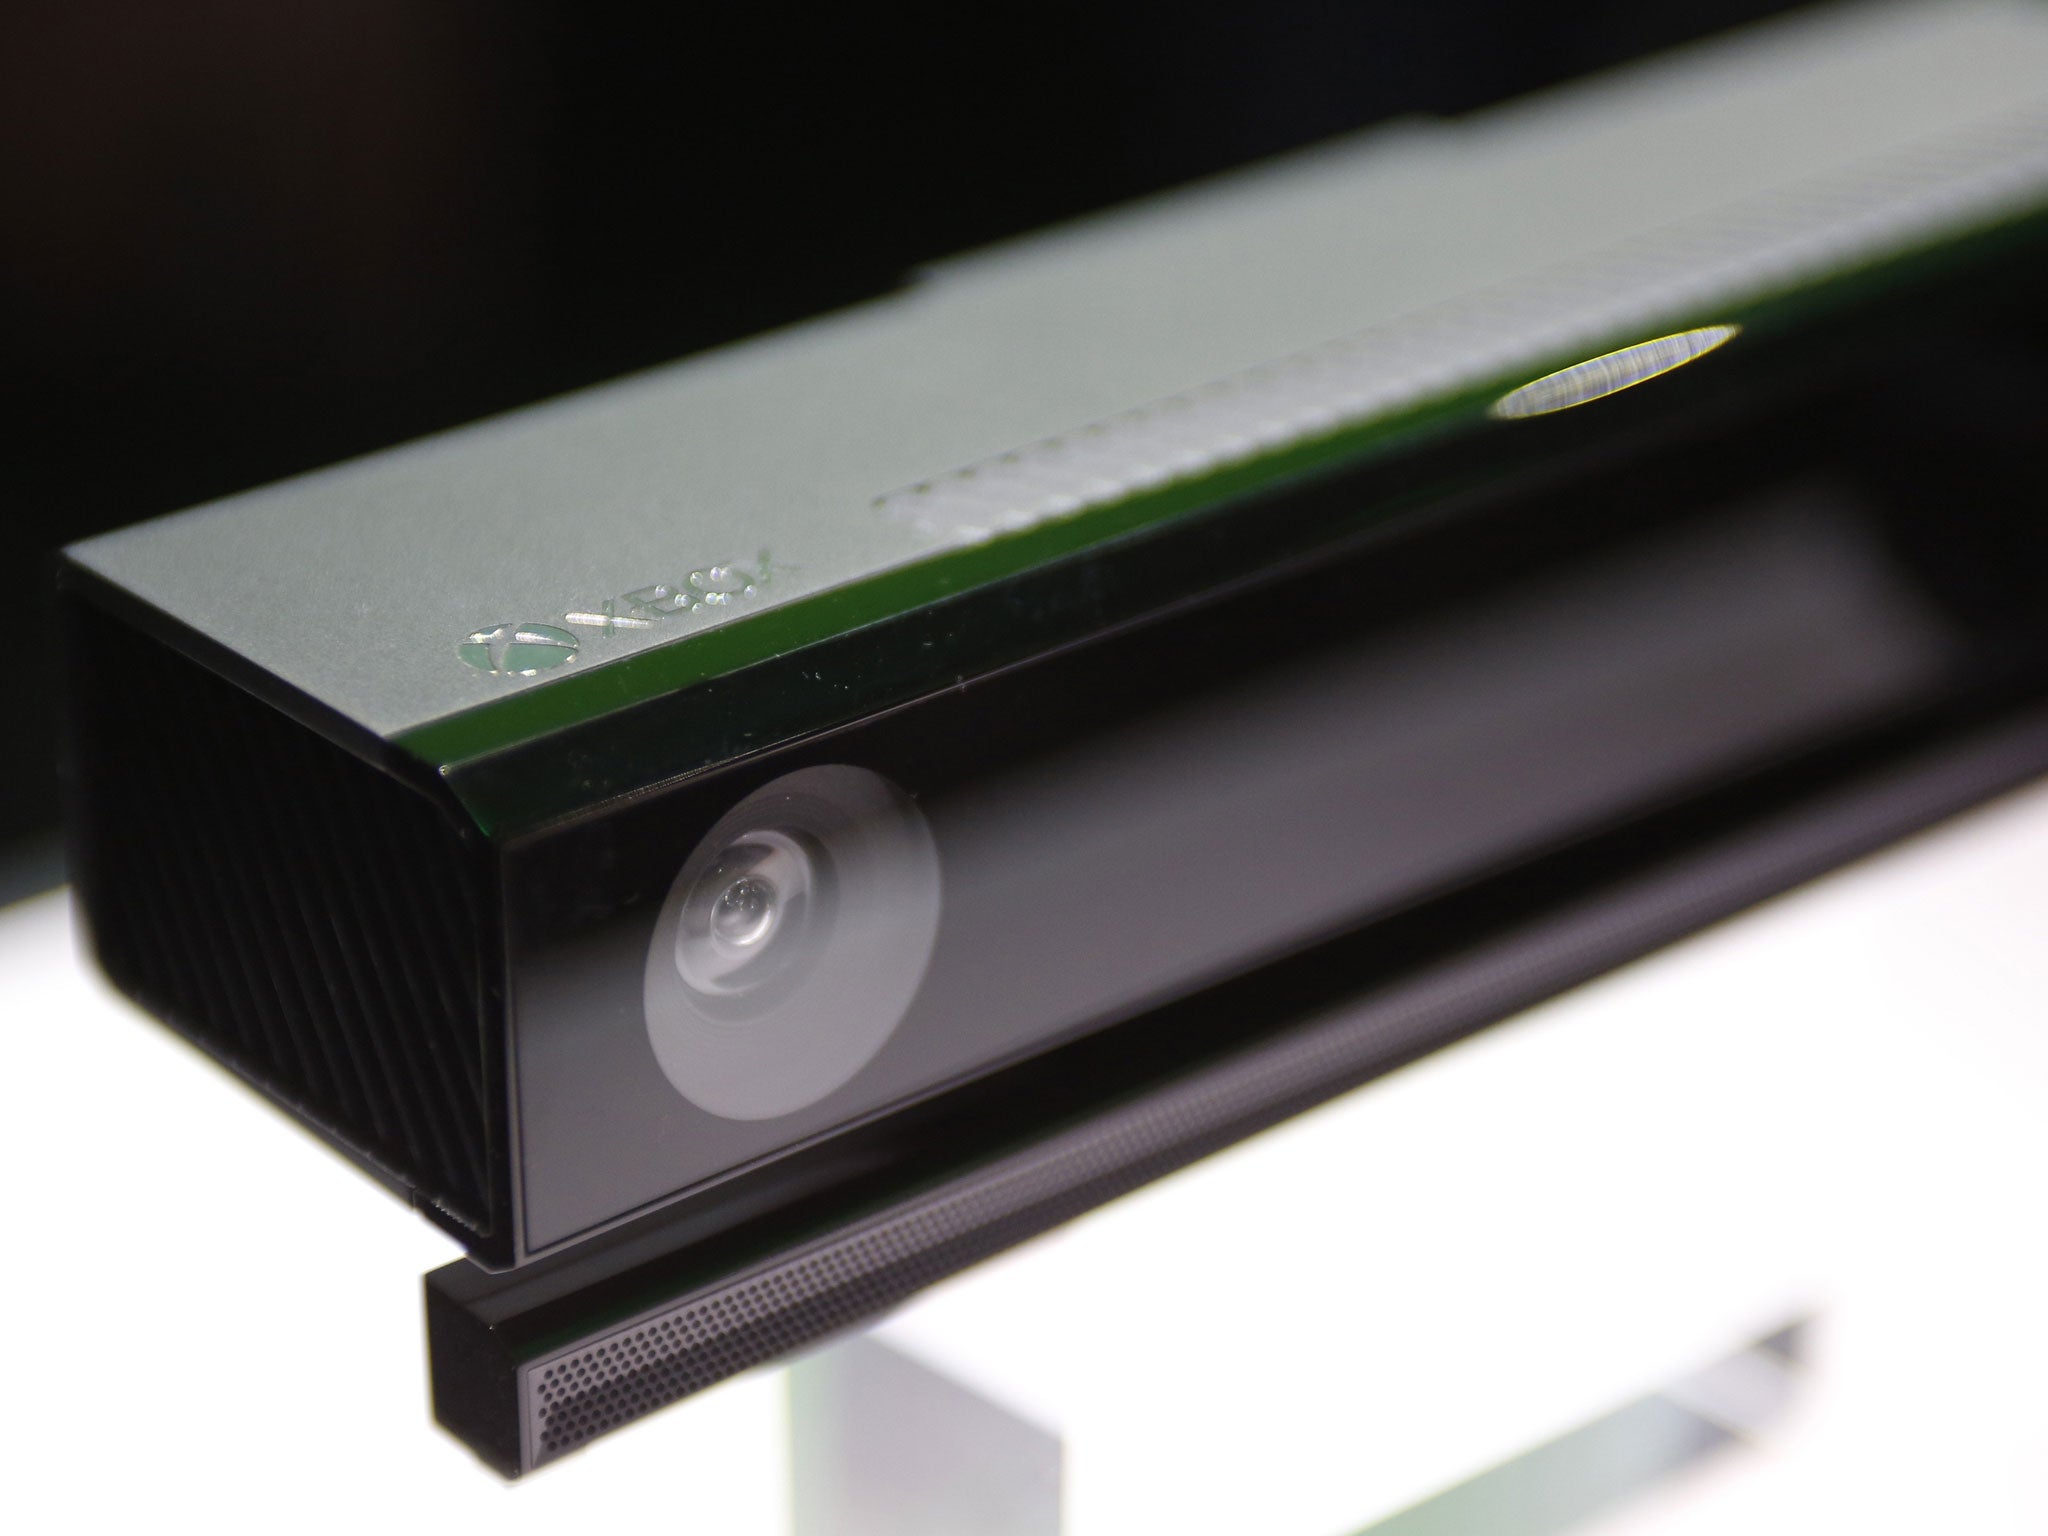 The Kinect 2.0 is impressive (it can see in the dark, there's infrared, etc) but it's still not the perfect way to navigate the system.